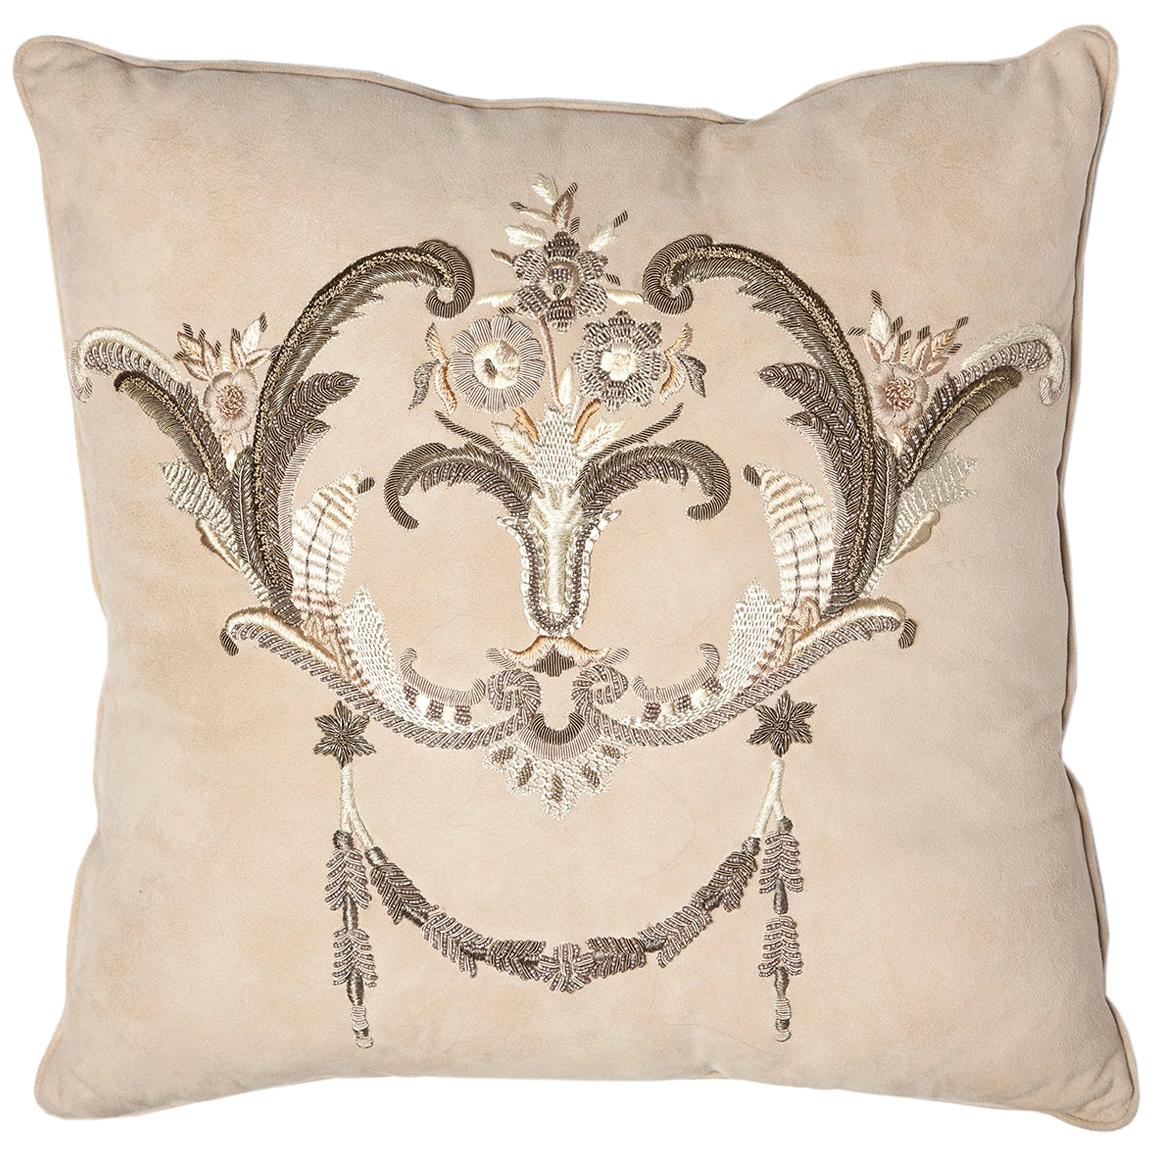 Louvois Metal Embroidery on Natural Suede Throw Pillow im Angebot